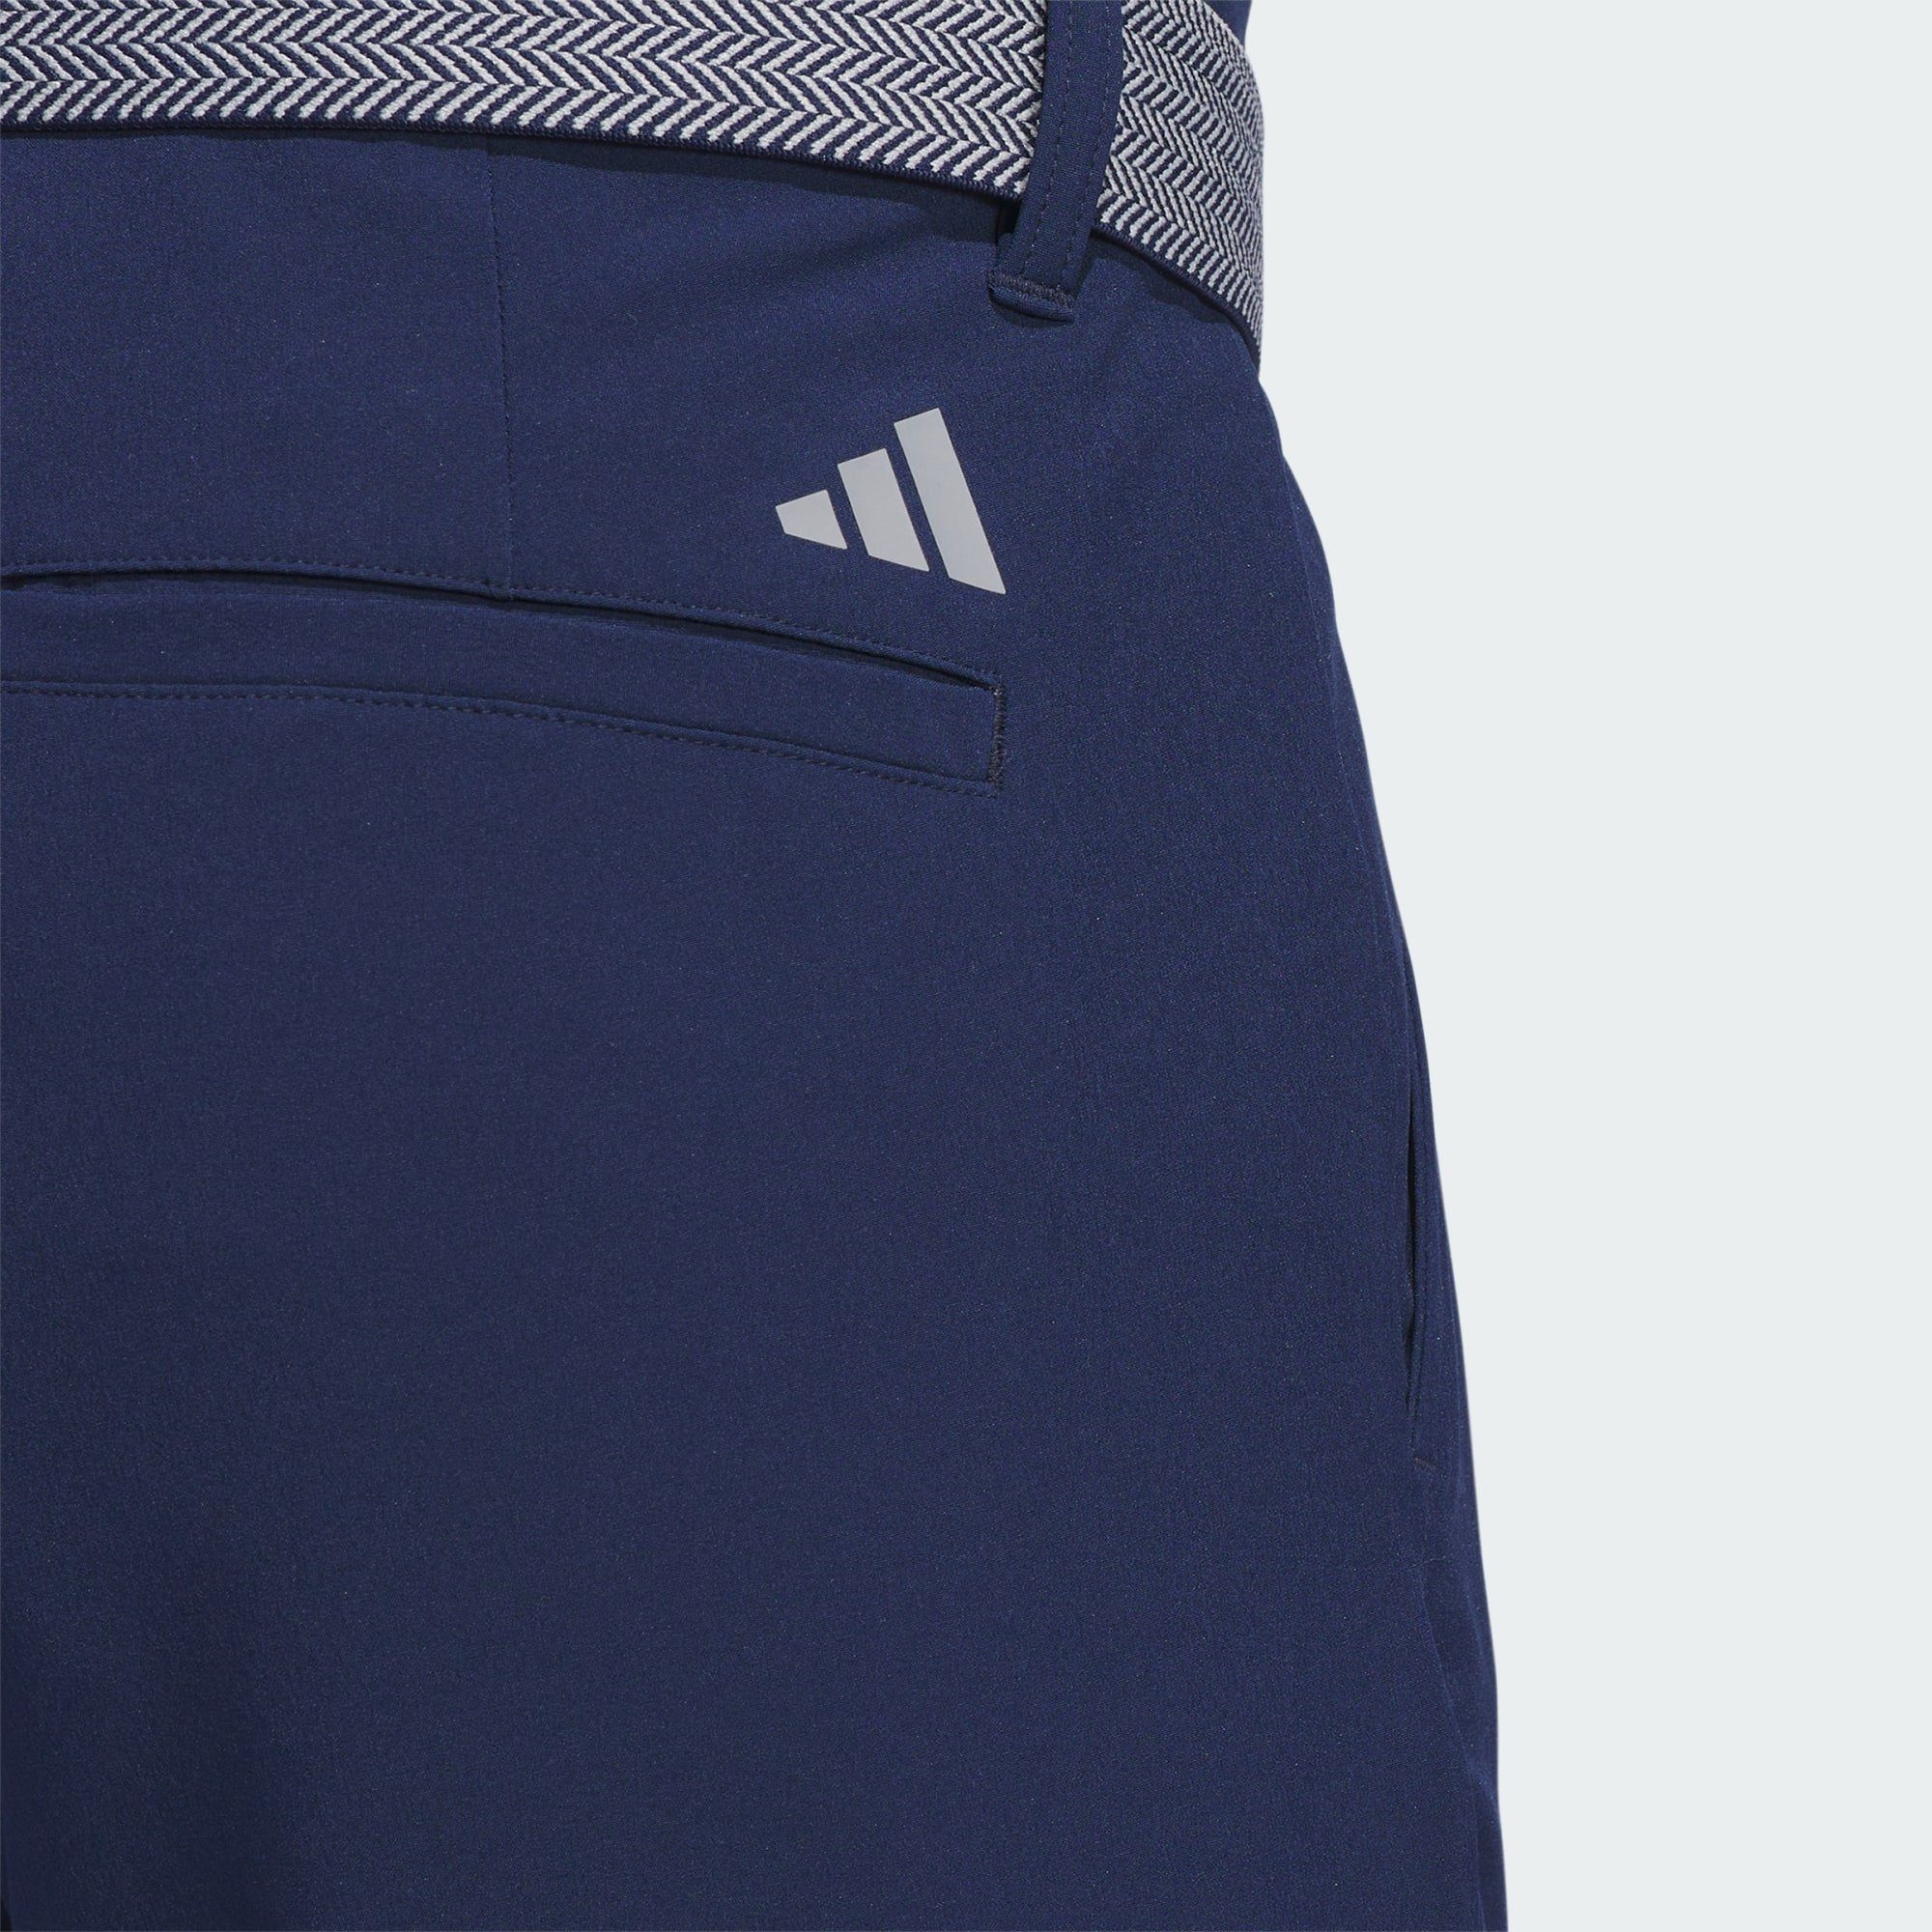 ULTIMATE365 Performance GOLFHOSE adidas Golfhose Navy TAPERED Collegiate